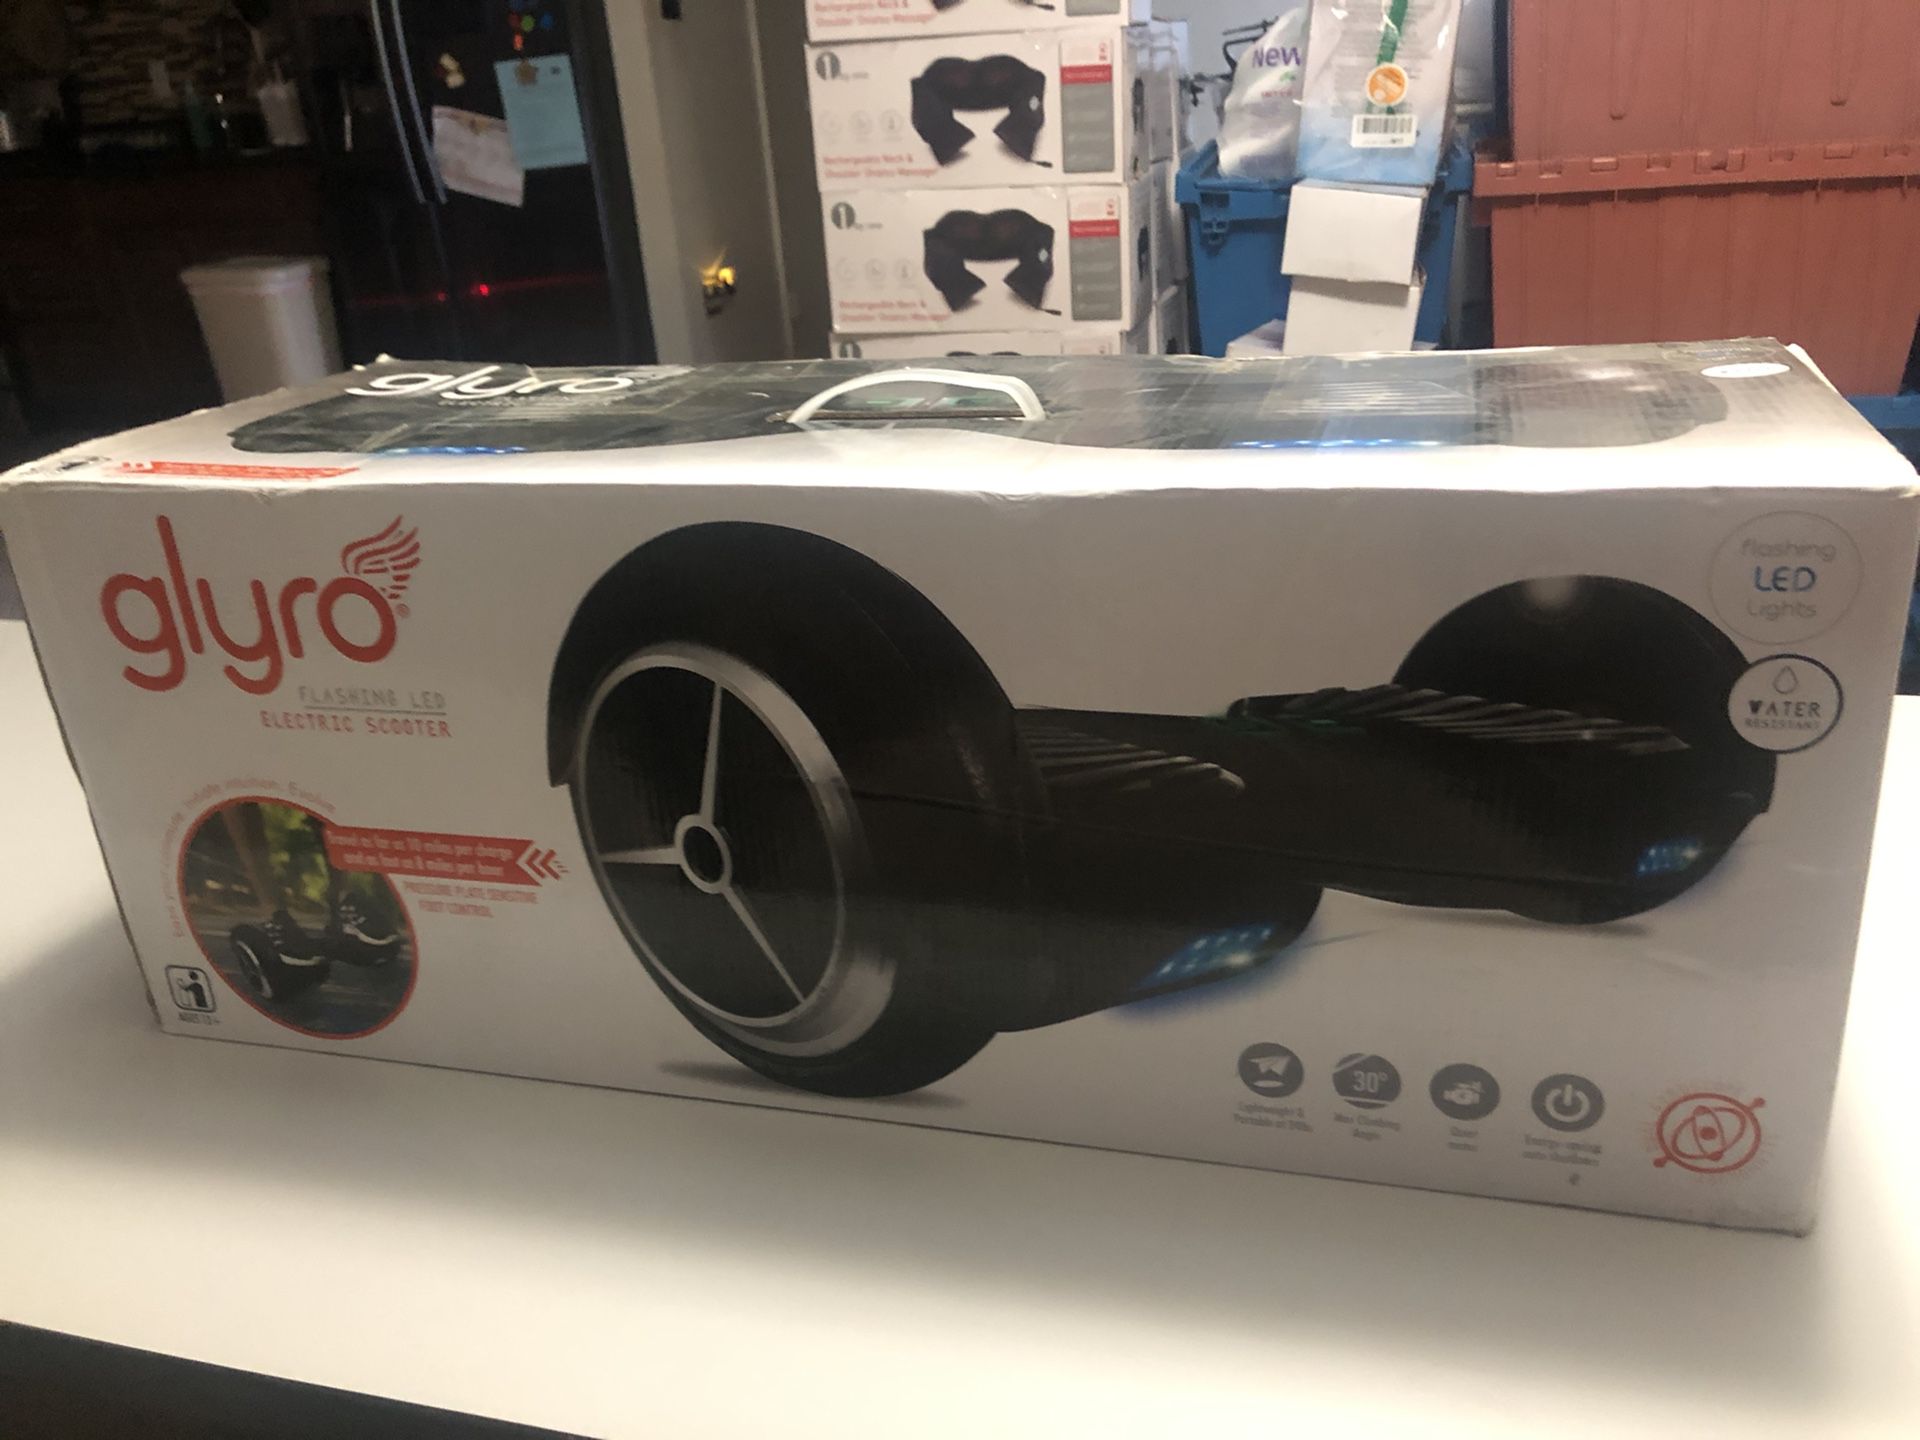 Brand new in the box Glyro Electric scooter I have white and black color.